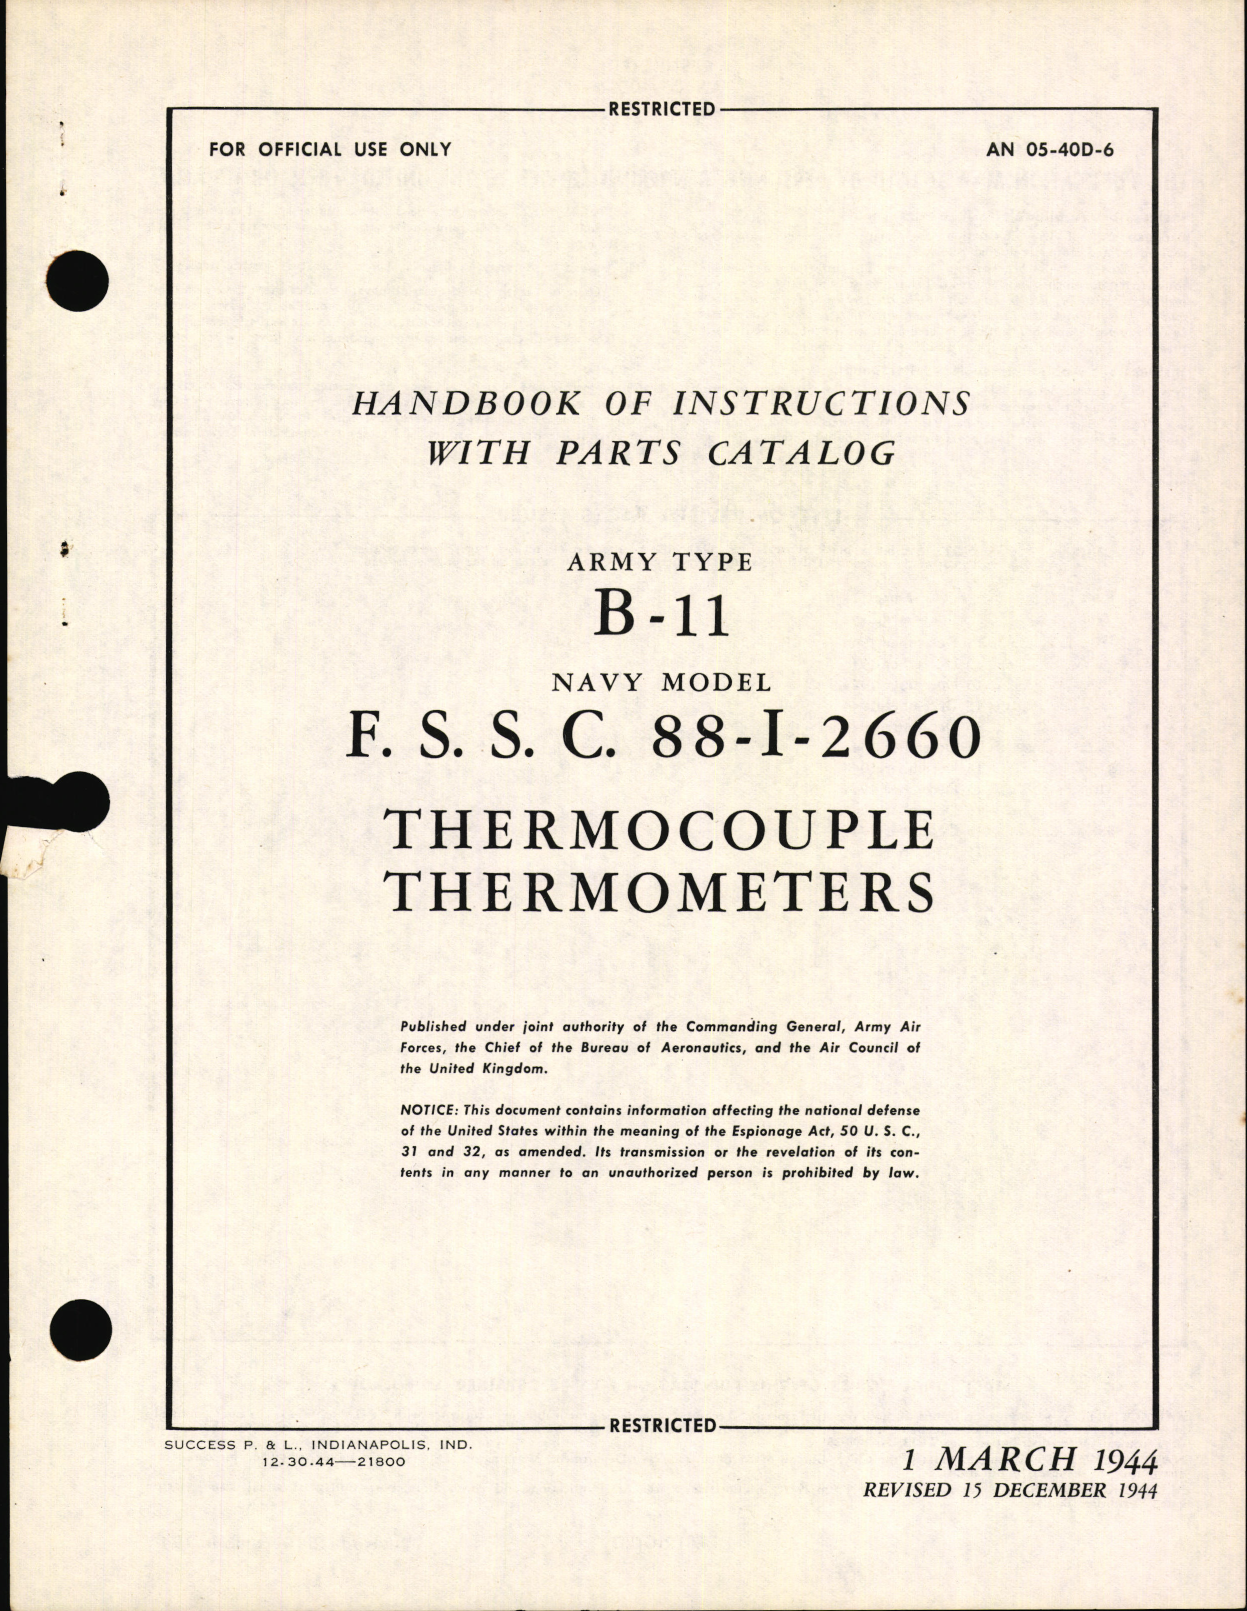 Sample page 3 from AirCorps Library document: Handbook of Instructions with Parts Catalog for Type B-11 and F.S.S.C. 88-I-2660 Thermocouple Thermometers